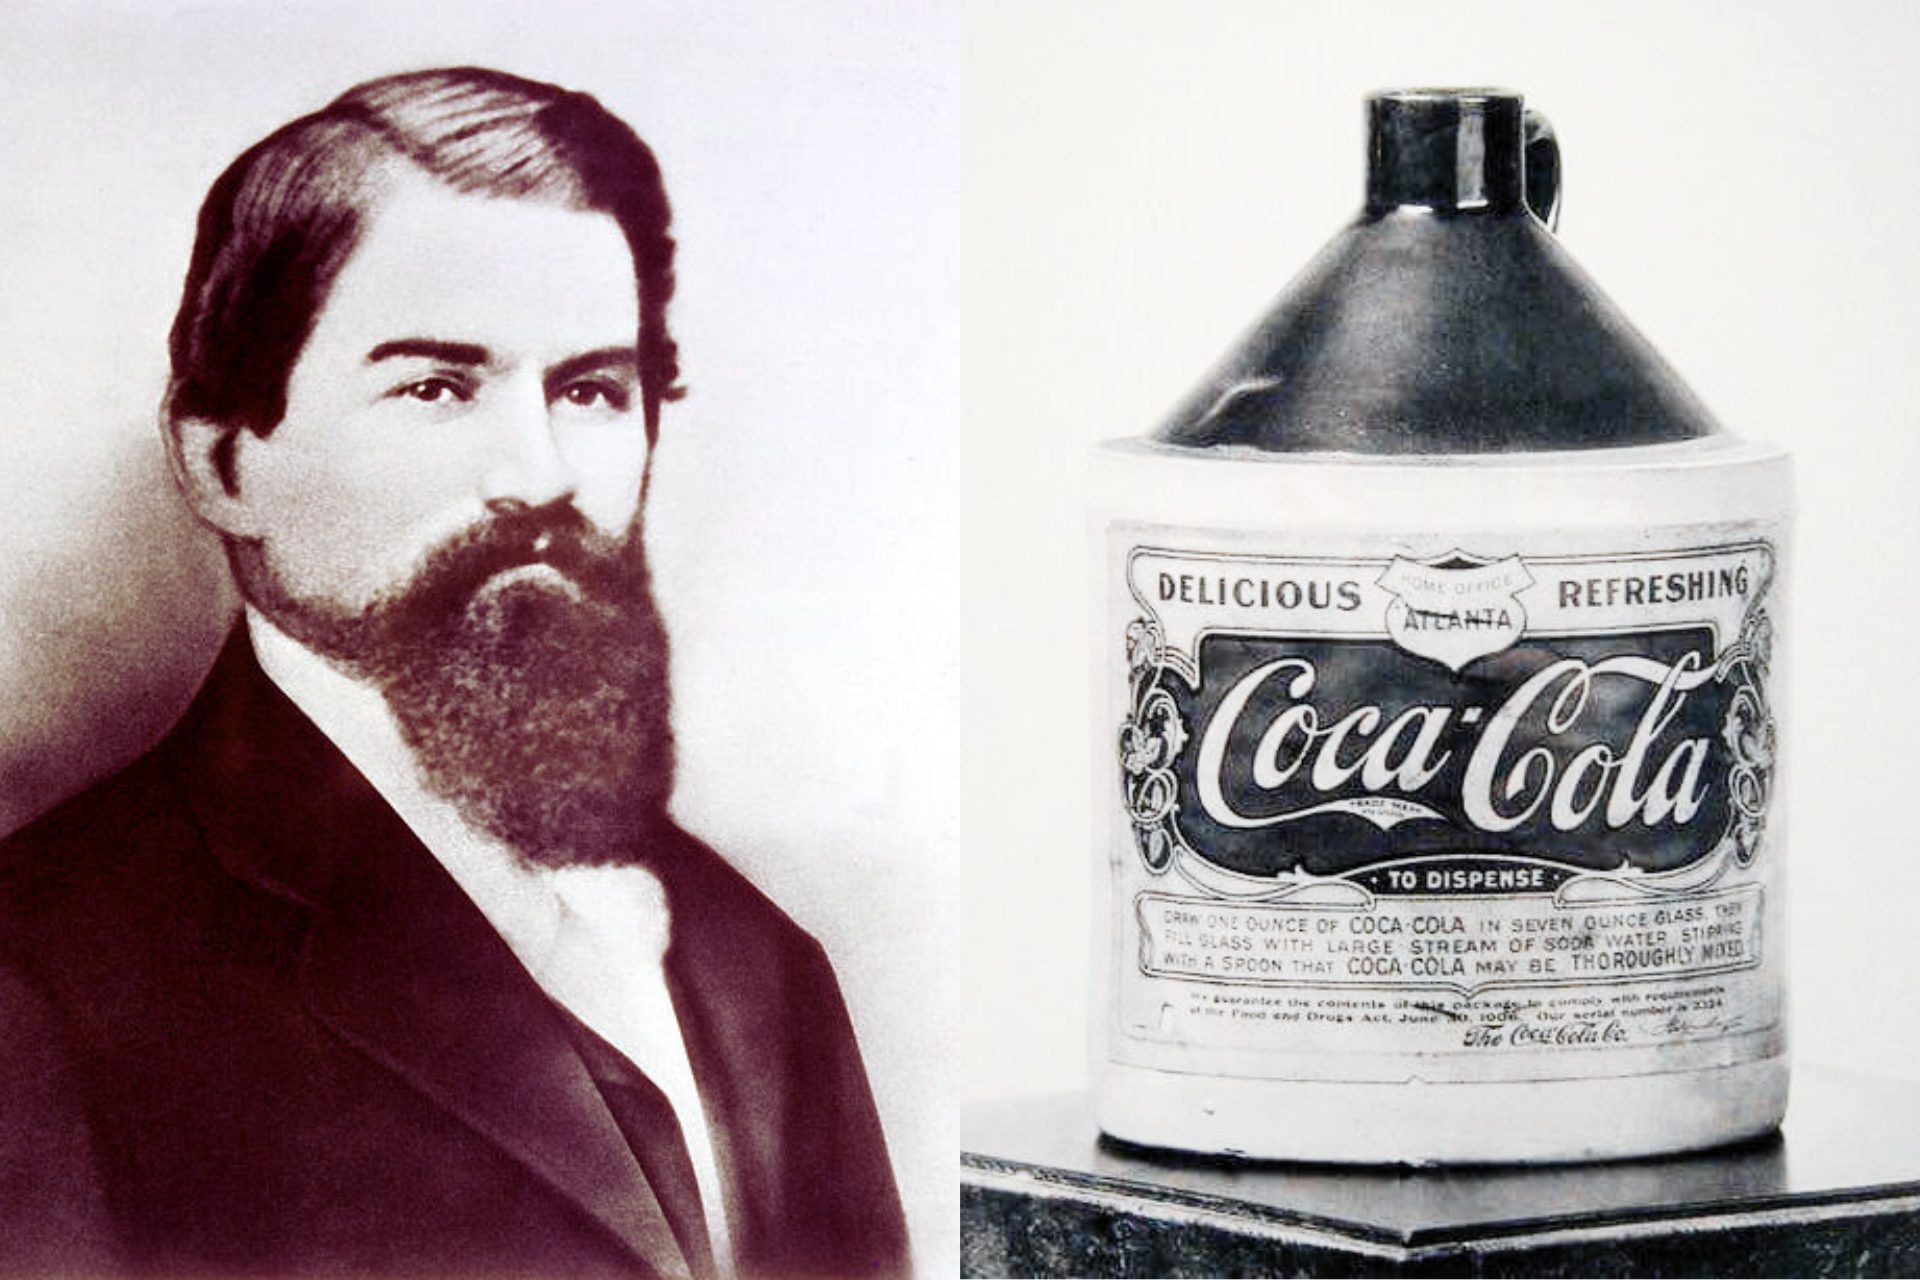 A side by side photo of John Pemberton, the inventor of Coca-Cola and the jug Coca Cola was first sold in